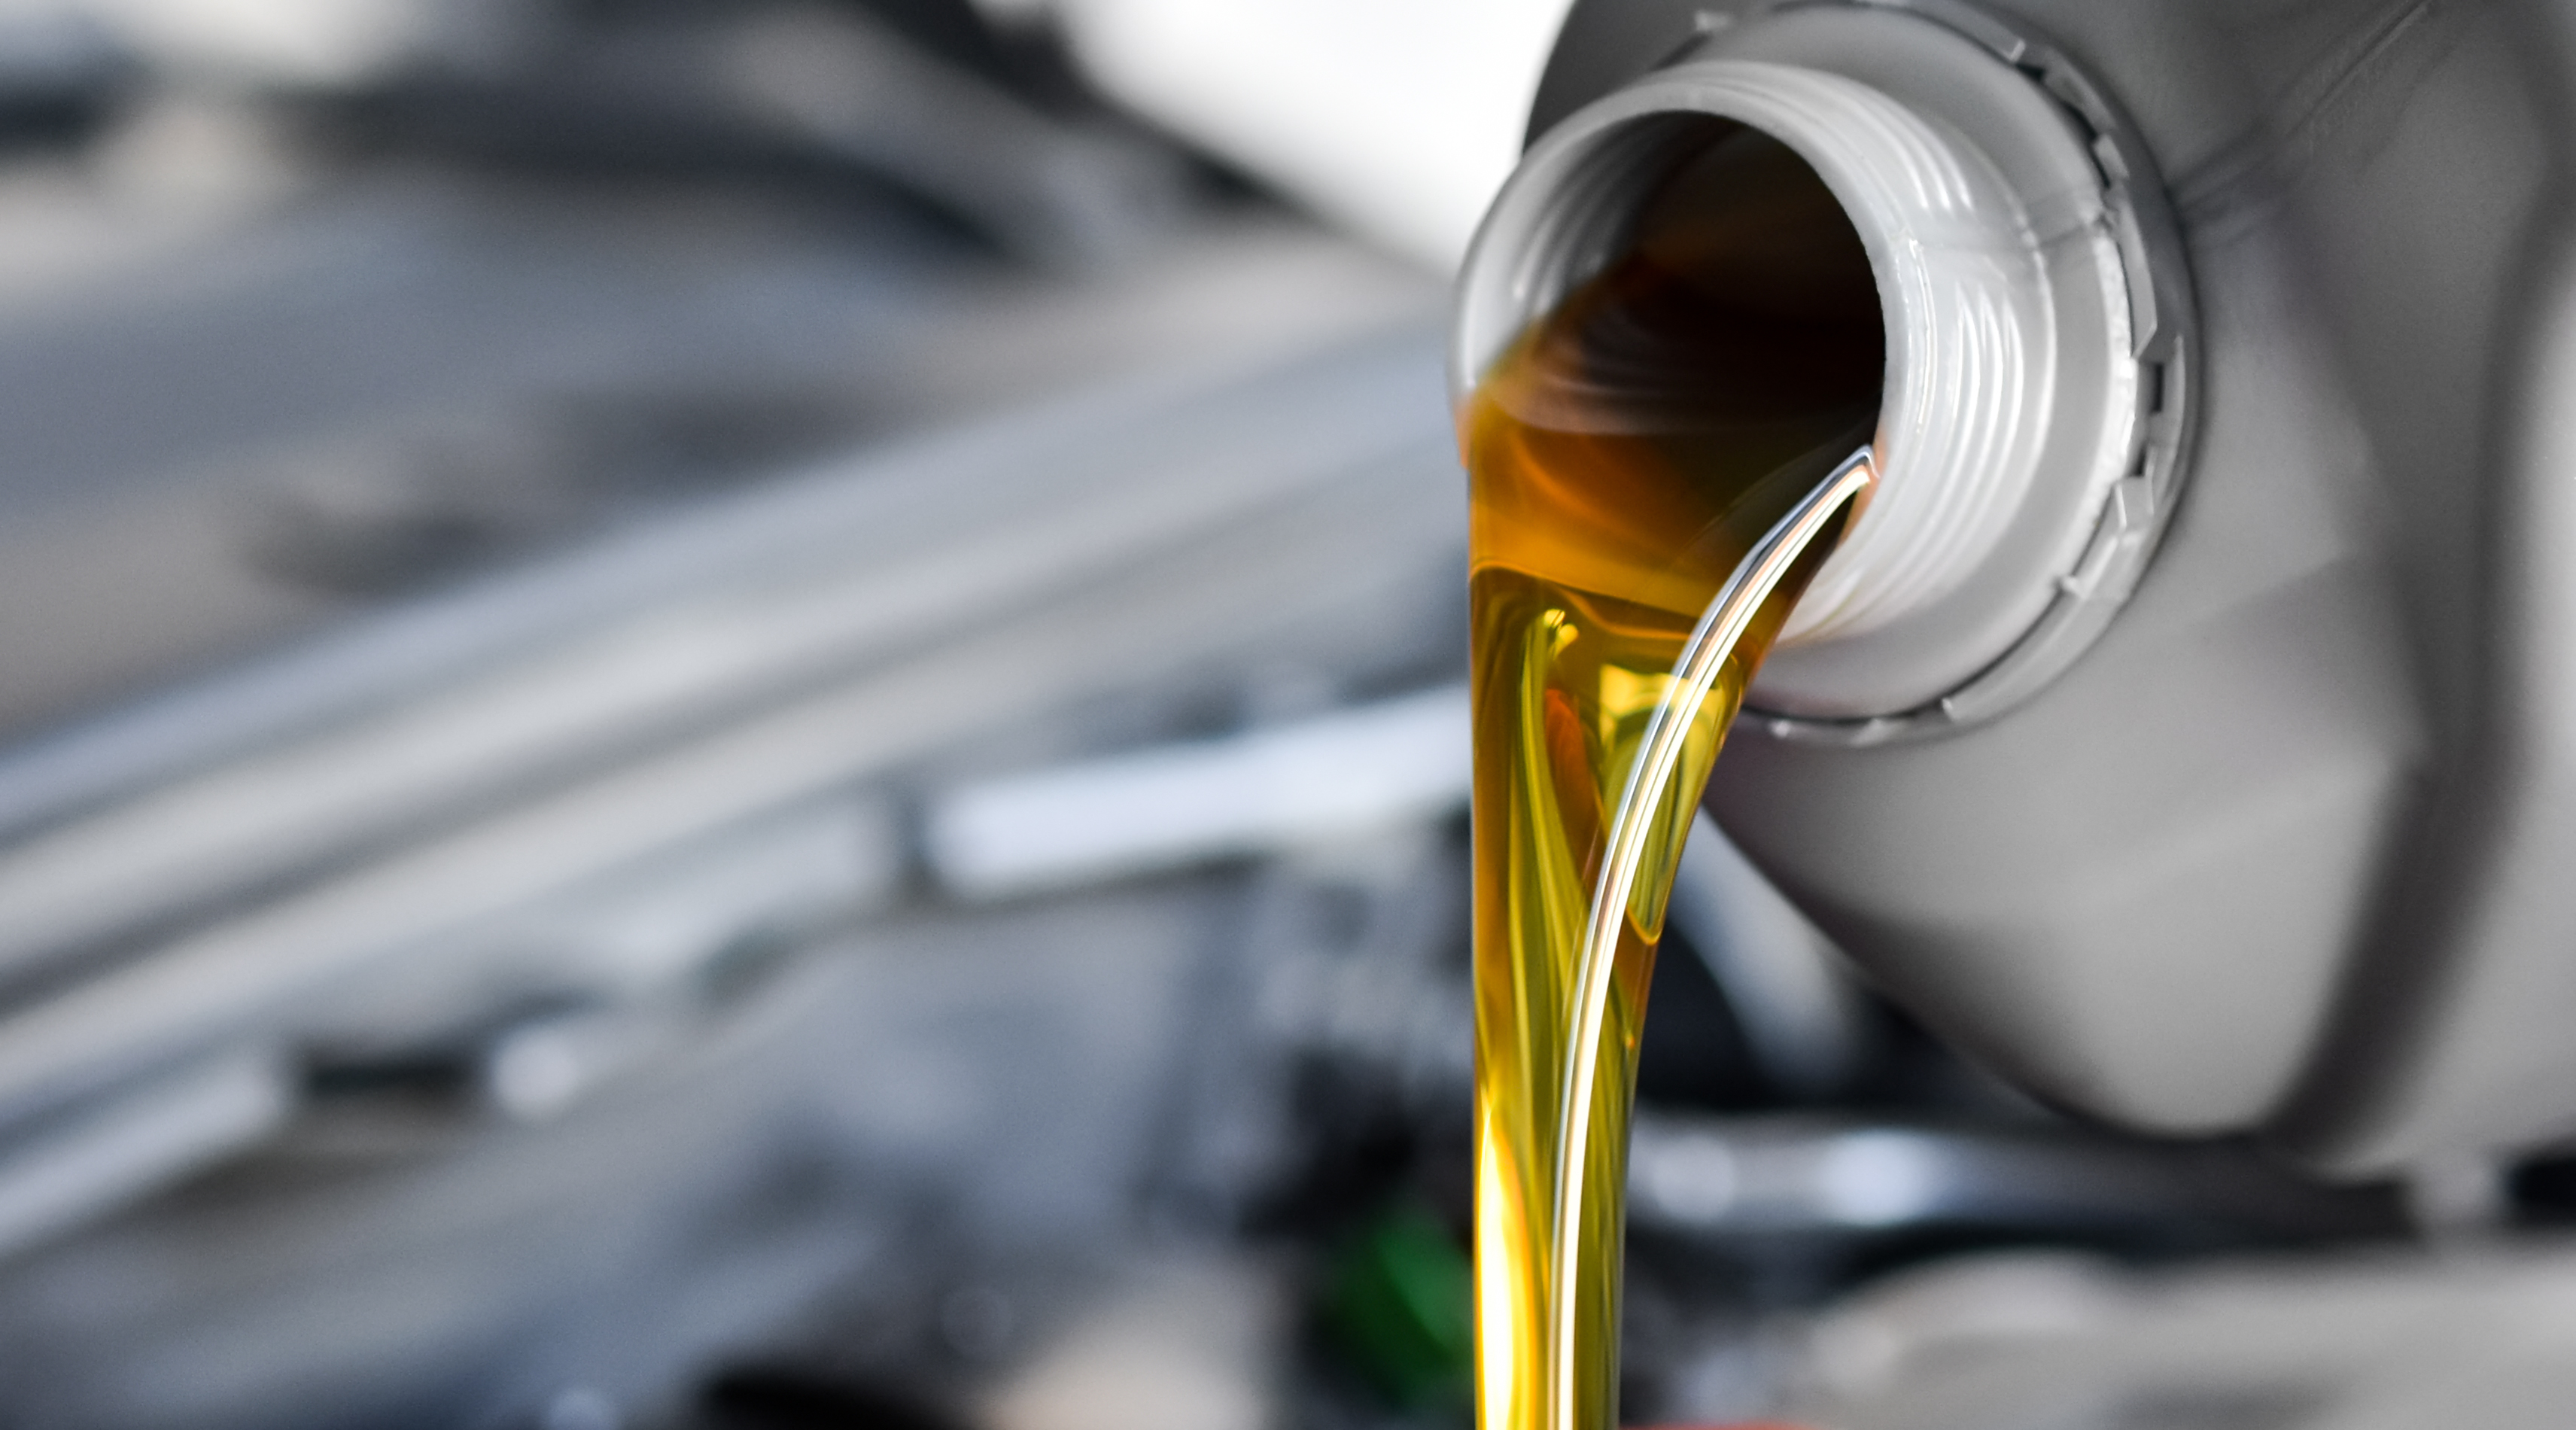 Can you use motor oil in your car's gas tank as an alternative to